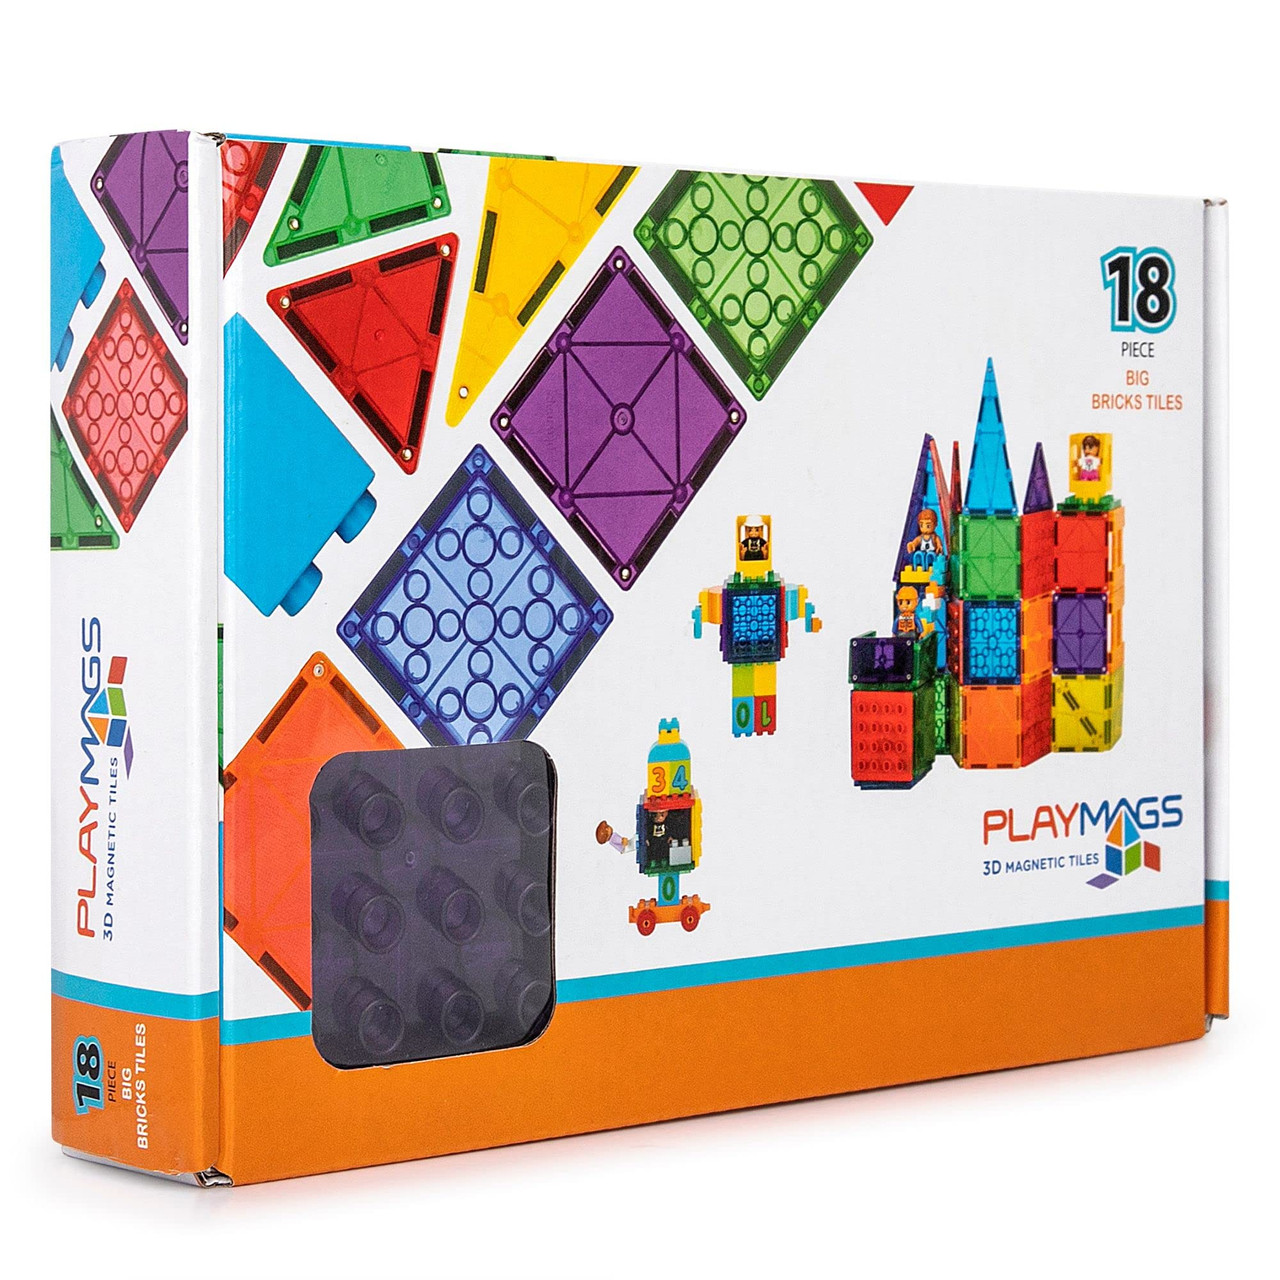 Playmags Magnetic Tiles, Magnetic Building Bricks, Playmags Exclusive  Magnetic Blocks, Skill Development, Ages 3+ (Big Bricks Tiles) - Toys 4 U